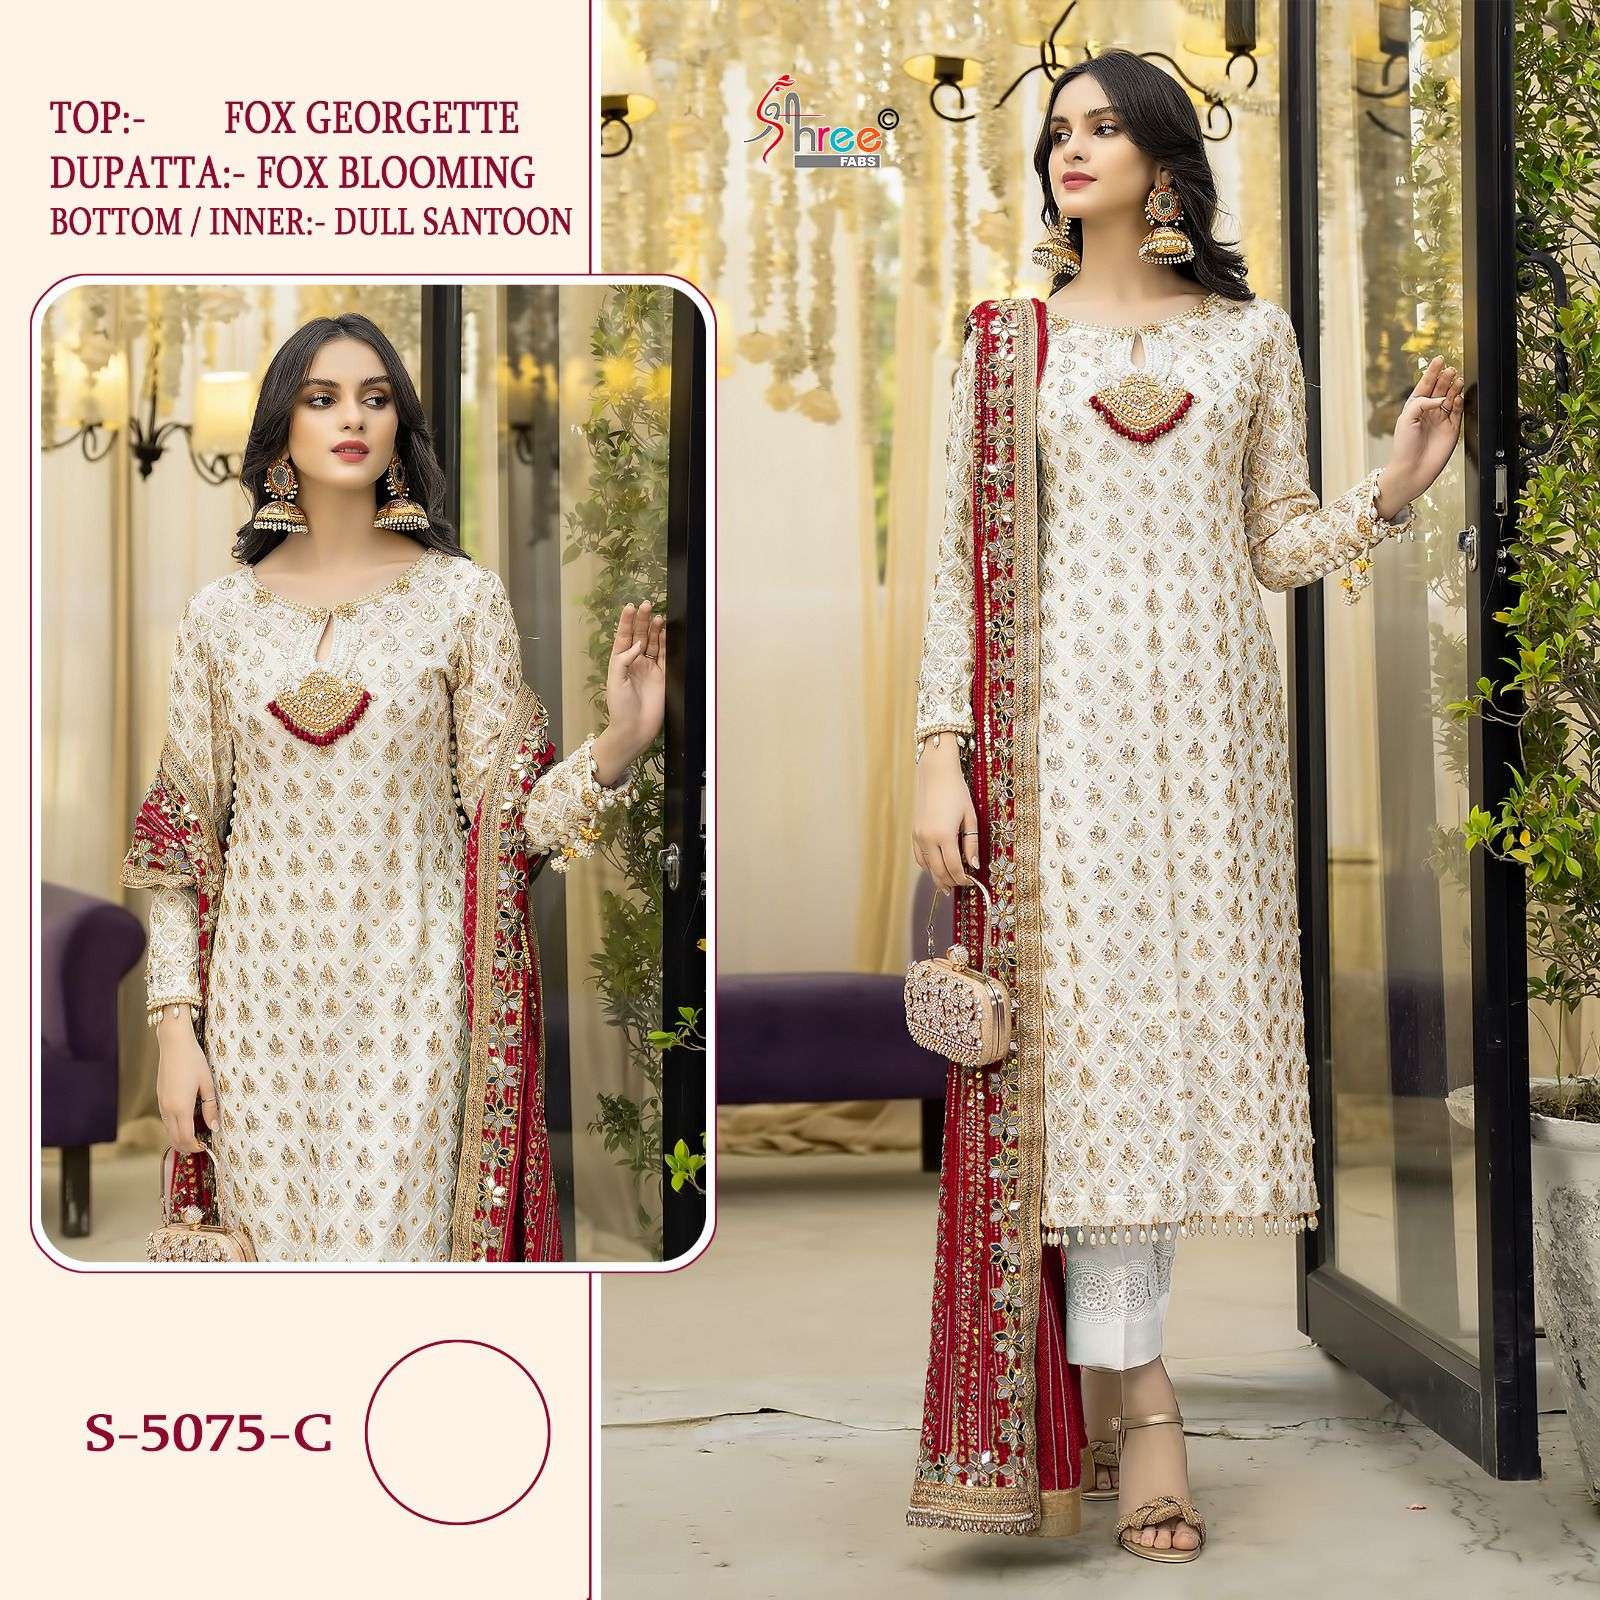 SHREE FABS S 5075 COLOURS GEORGETTE WITH EMBROIDERY WORK PAK...